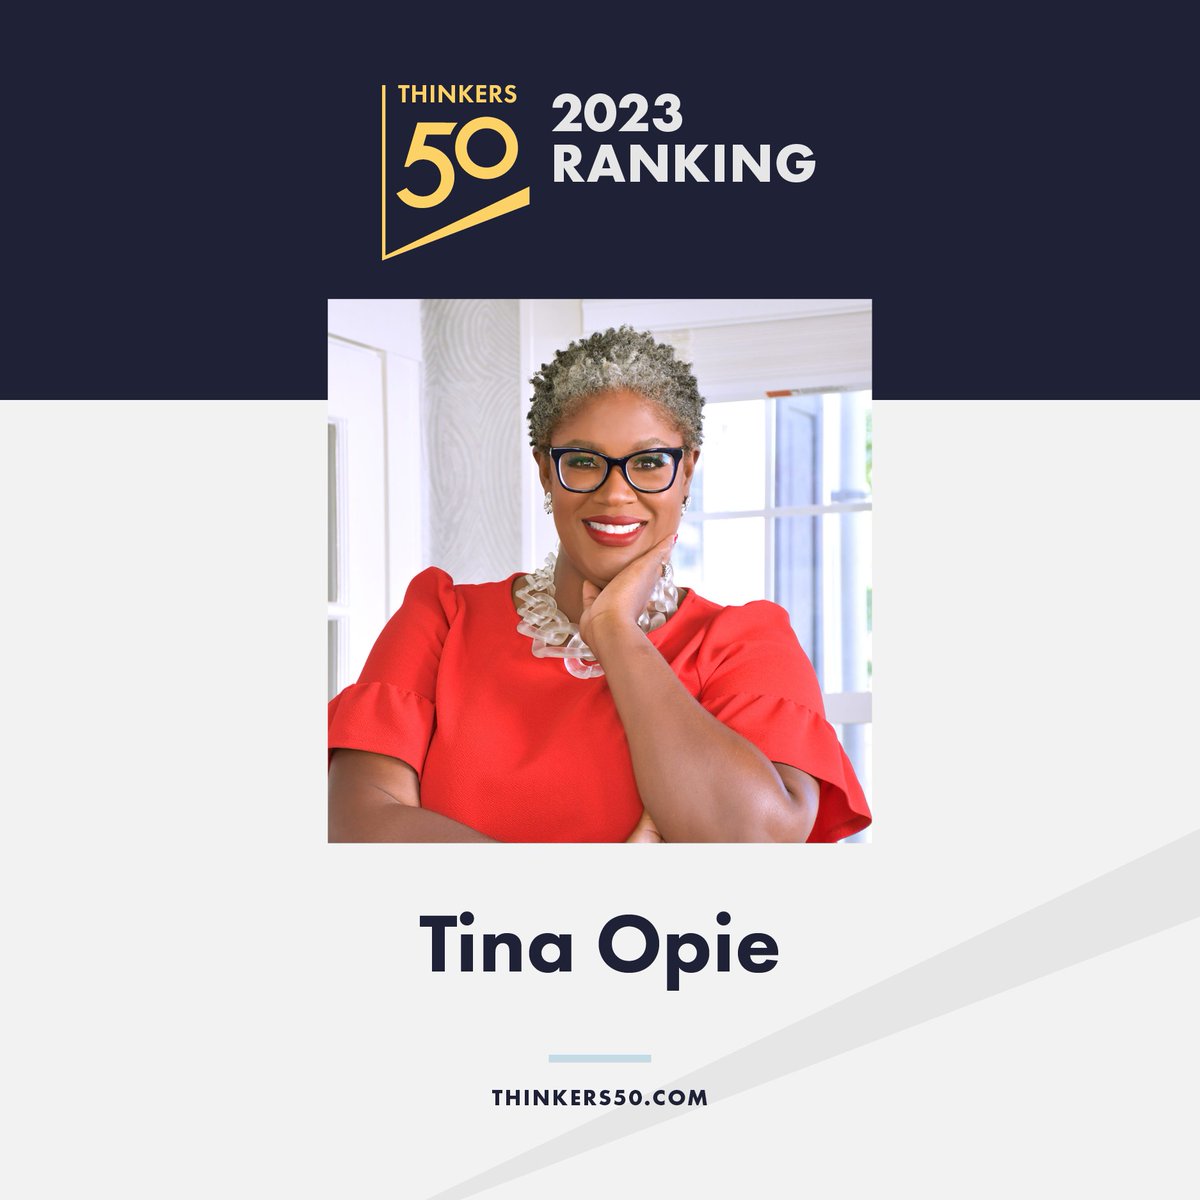 Congratulations to Babson College Associate Professor @DrTinaOpie! She has been named to the 2023 @Thinkers50 ranking of the world’s leading business and management thinkers. #Thinkers50